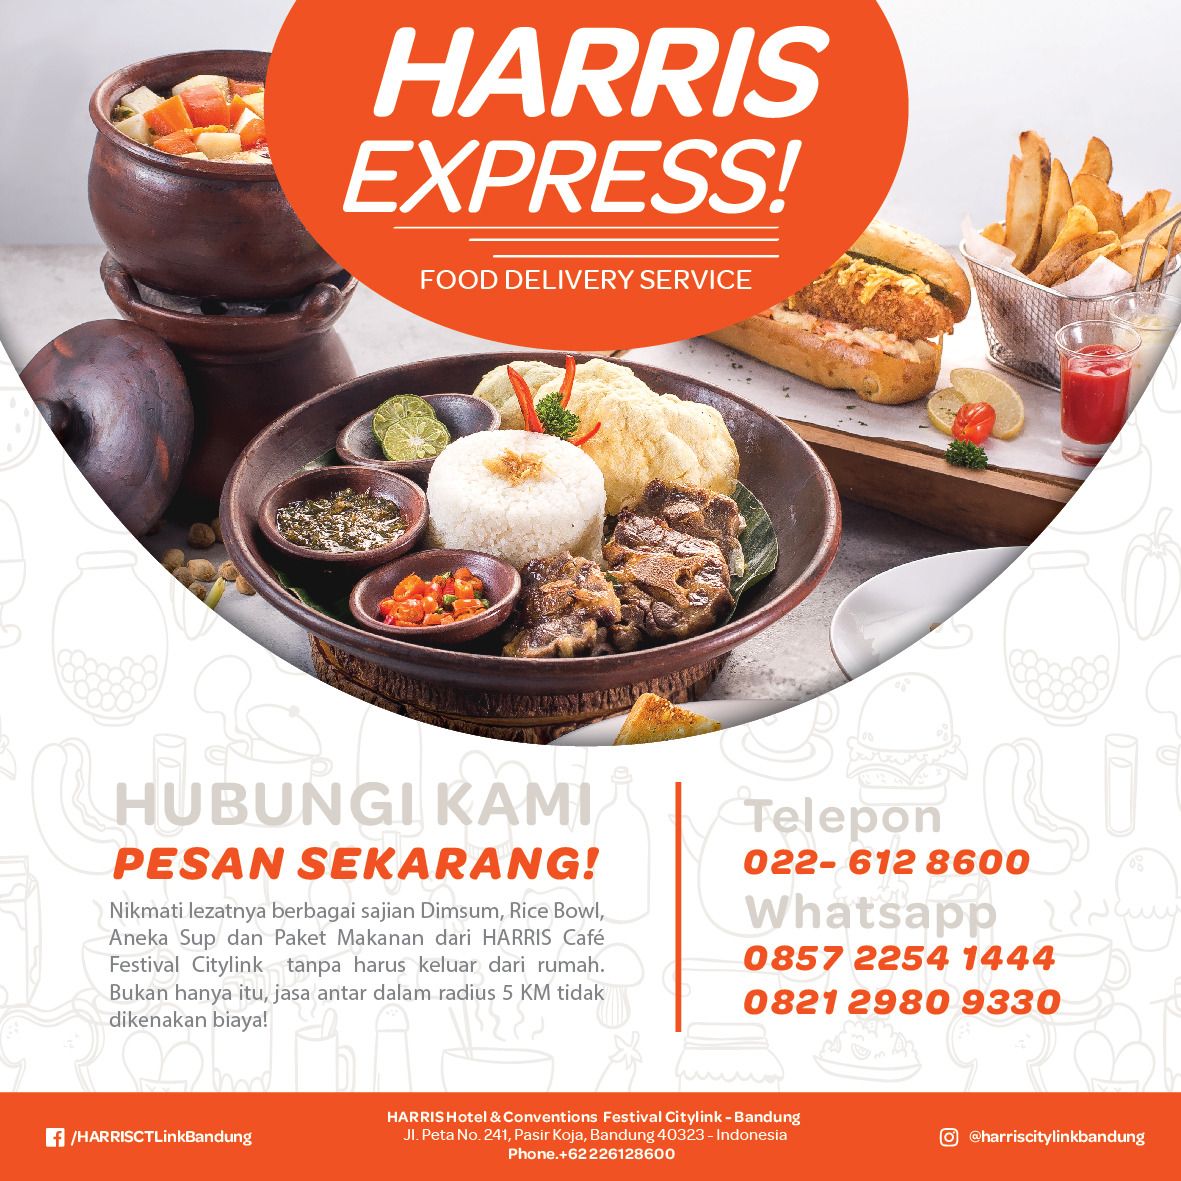 Contact Person Harris Hotel & Conventions Festival Citylink Bandung